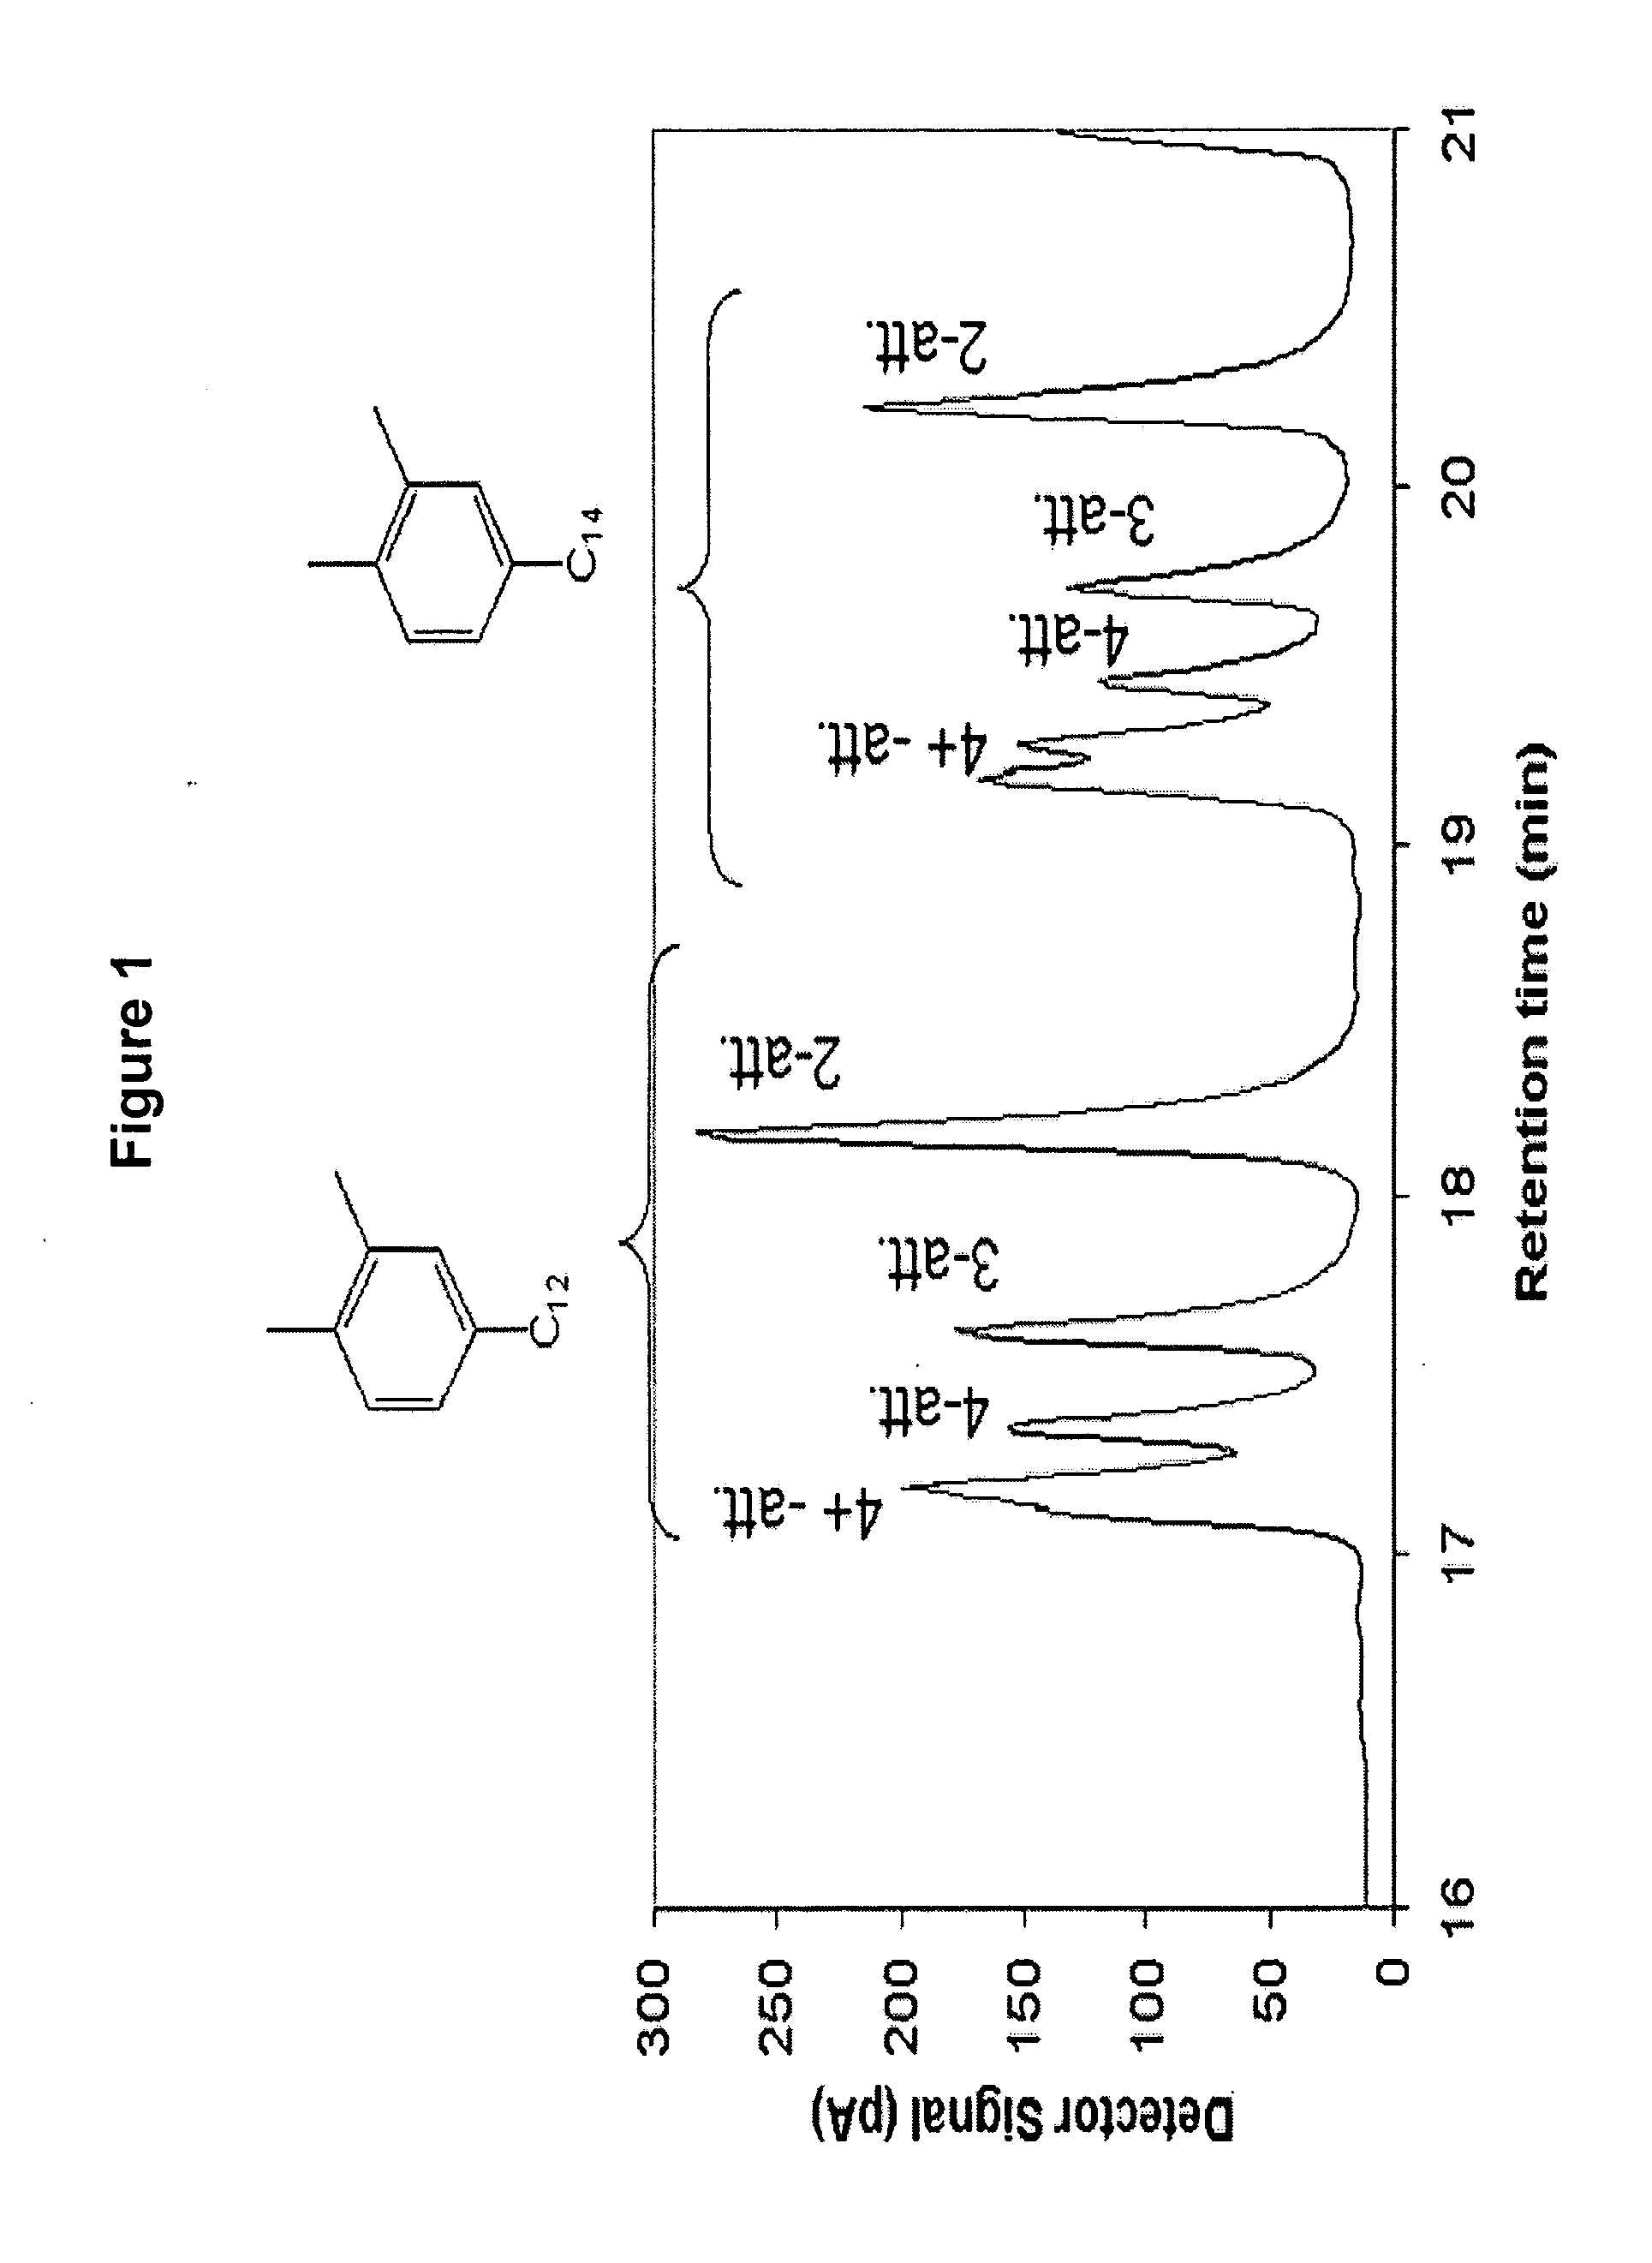 Alkylxylene sulfonates for enhanced oil recovery processes